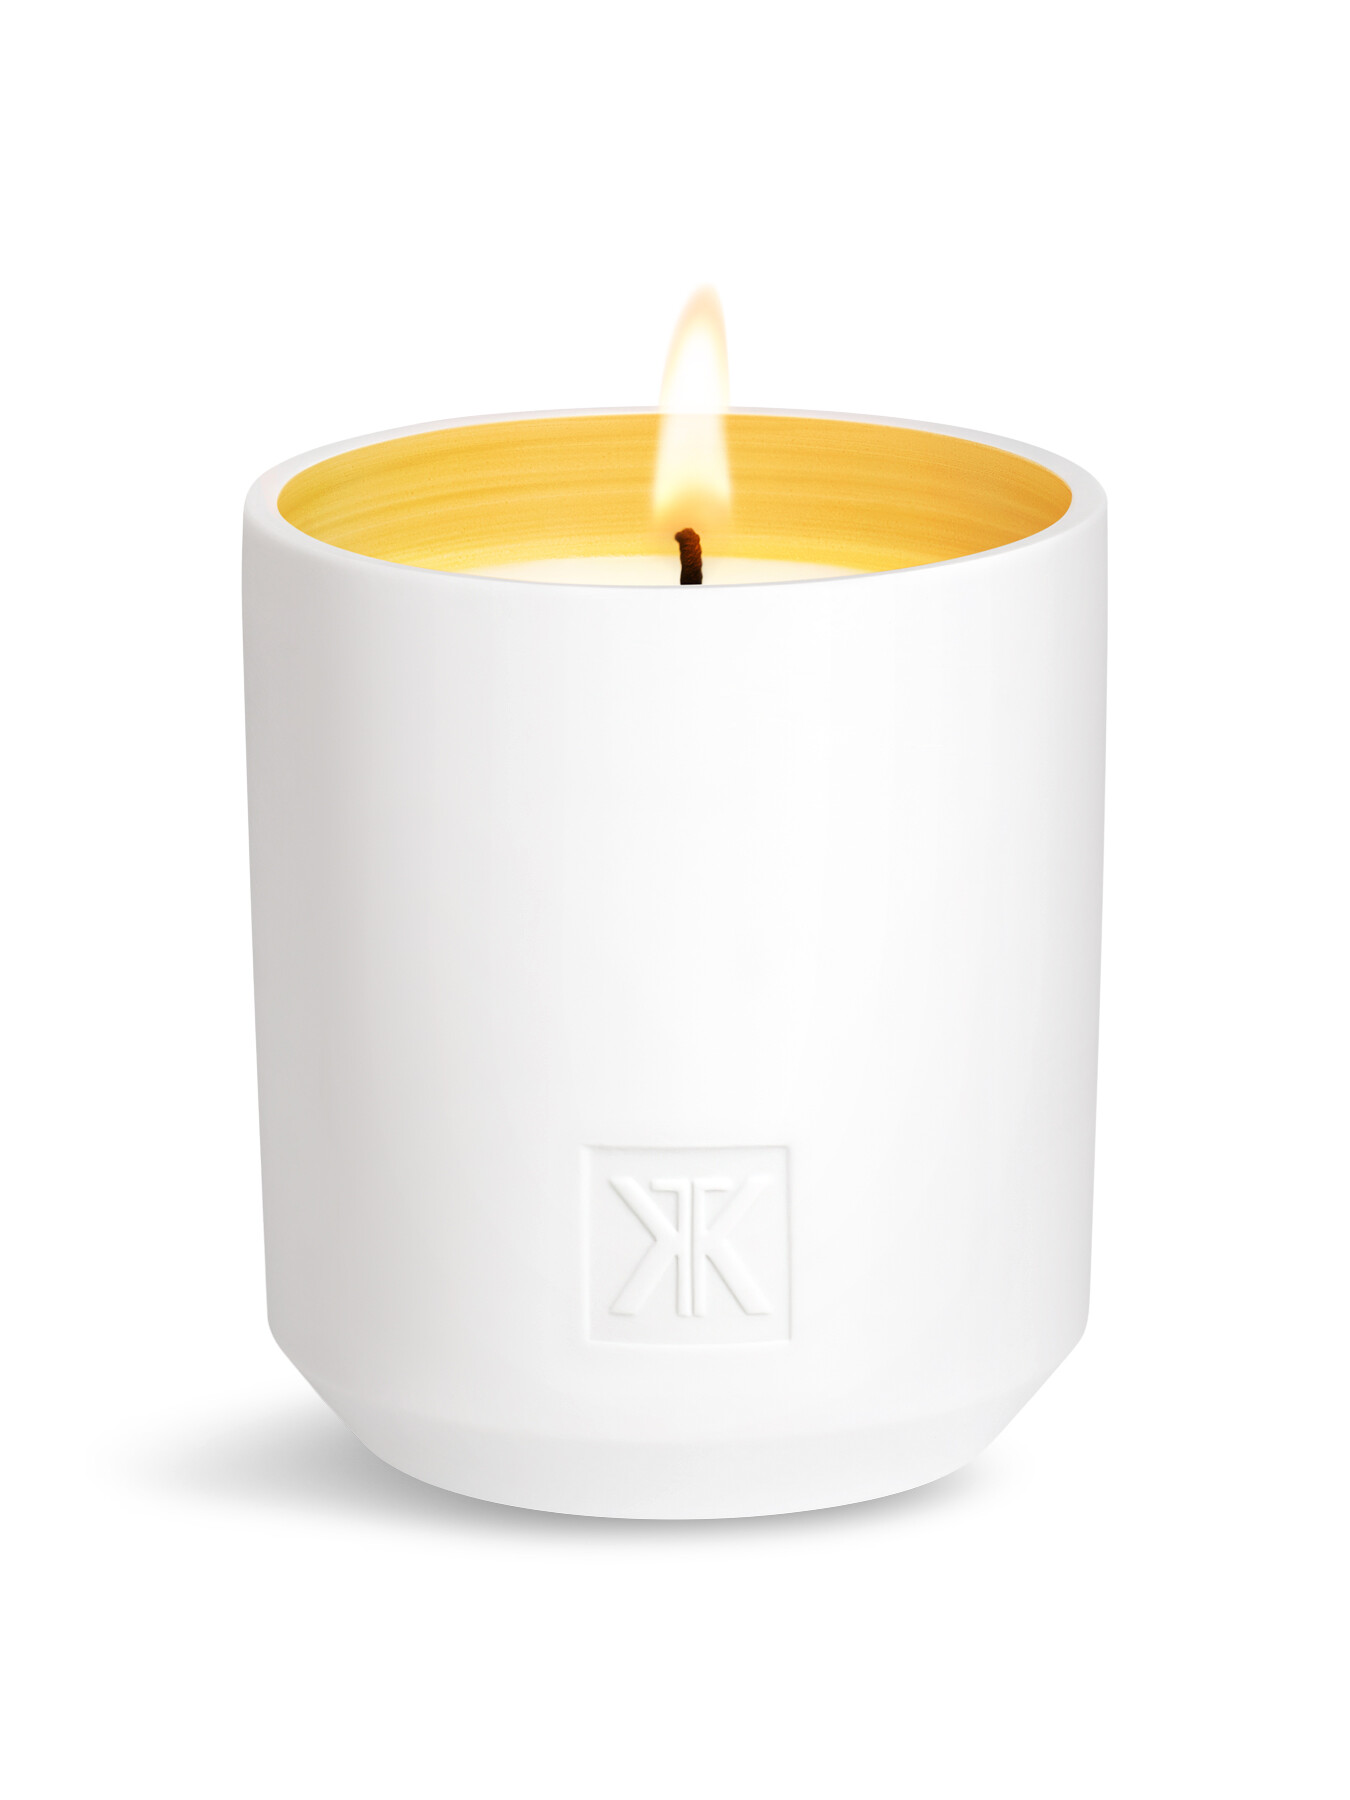 Maison Francis Kurkdjian Les Tamaris Scented Candle 280g In White